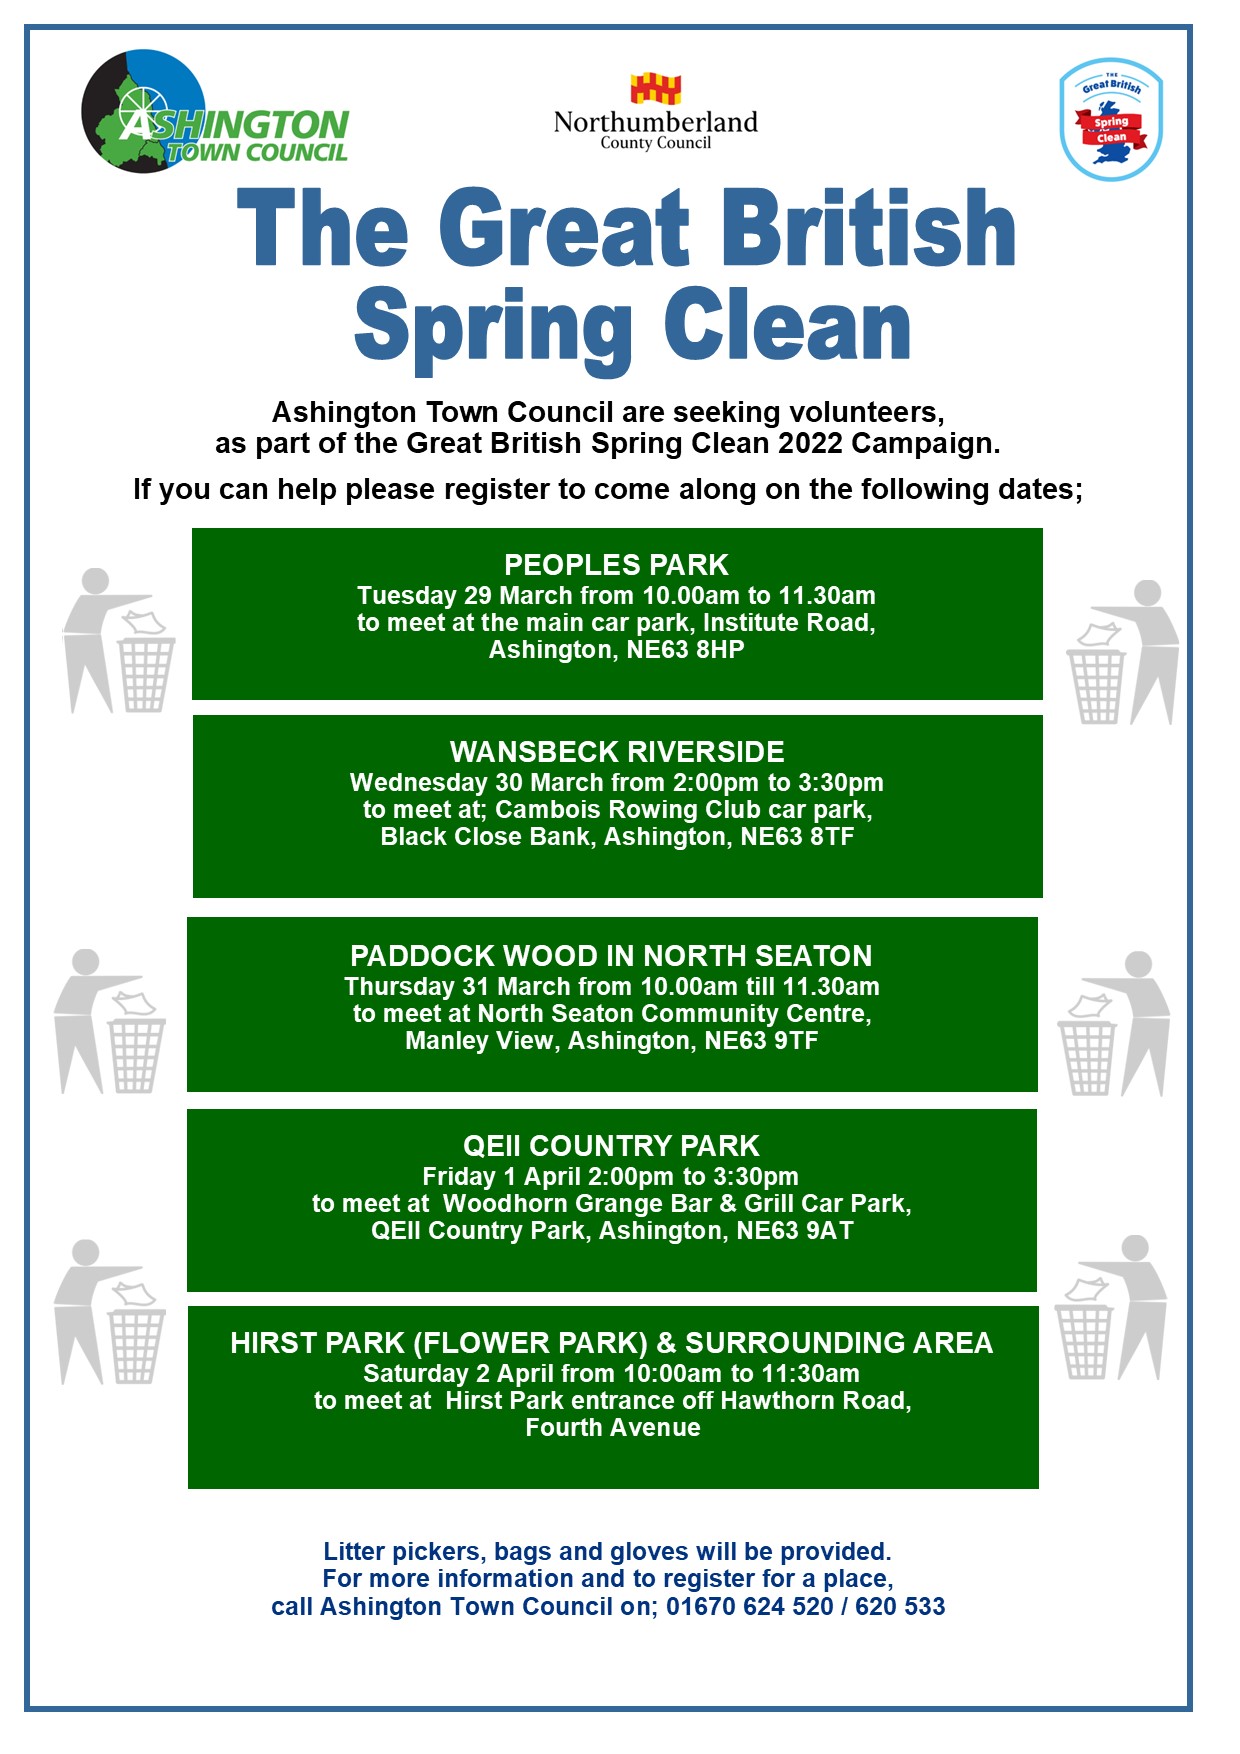 The Great British Spring Clean 2022